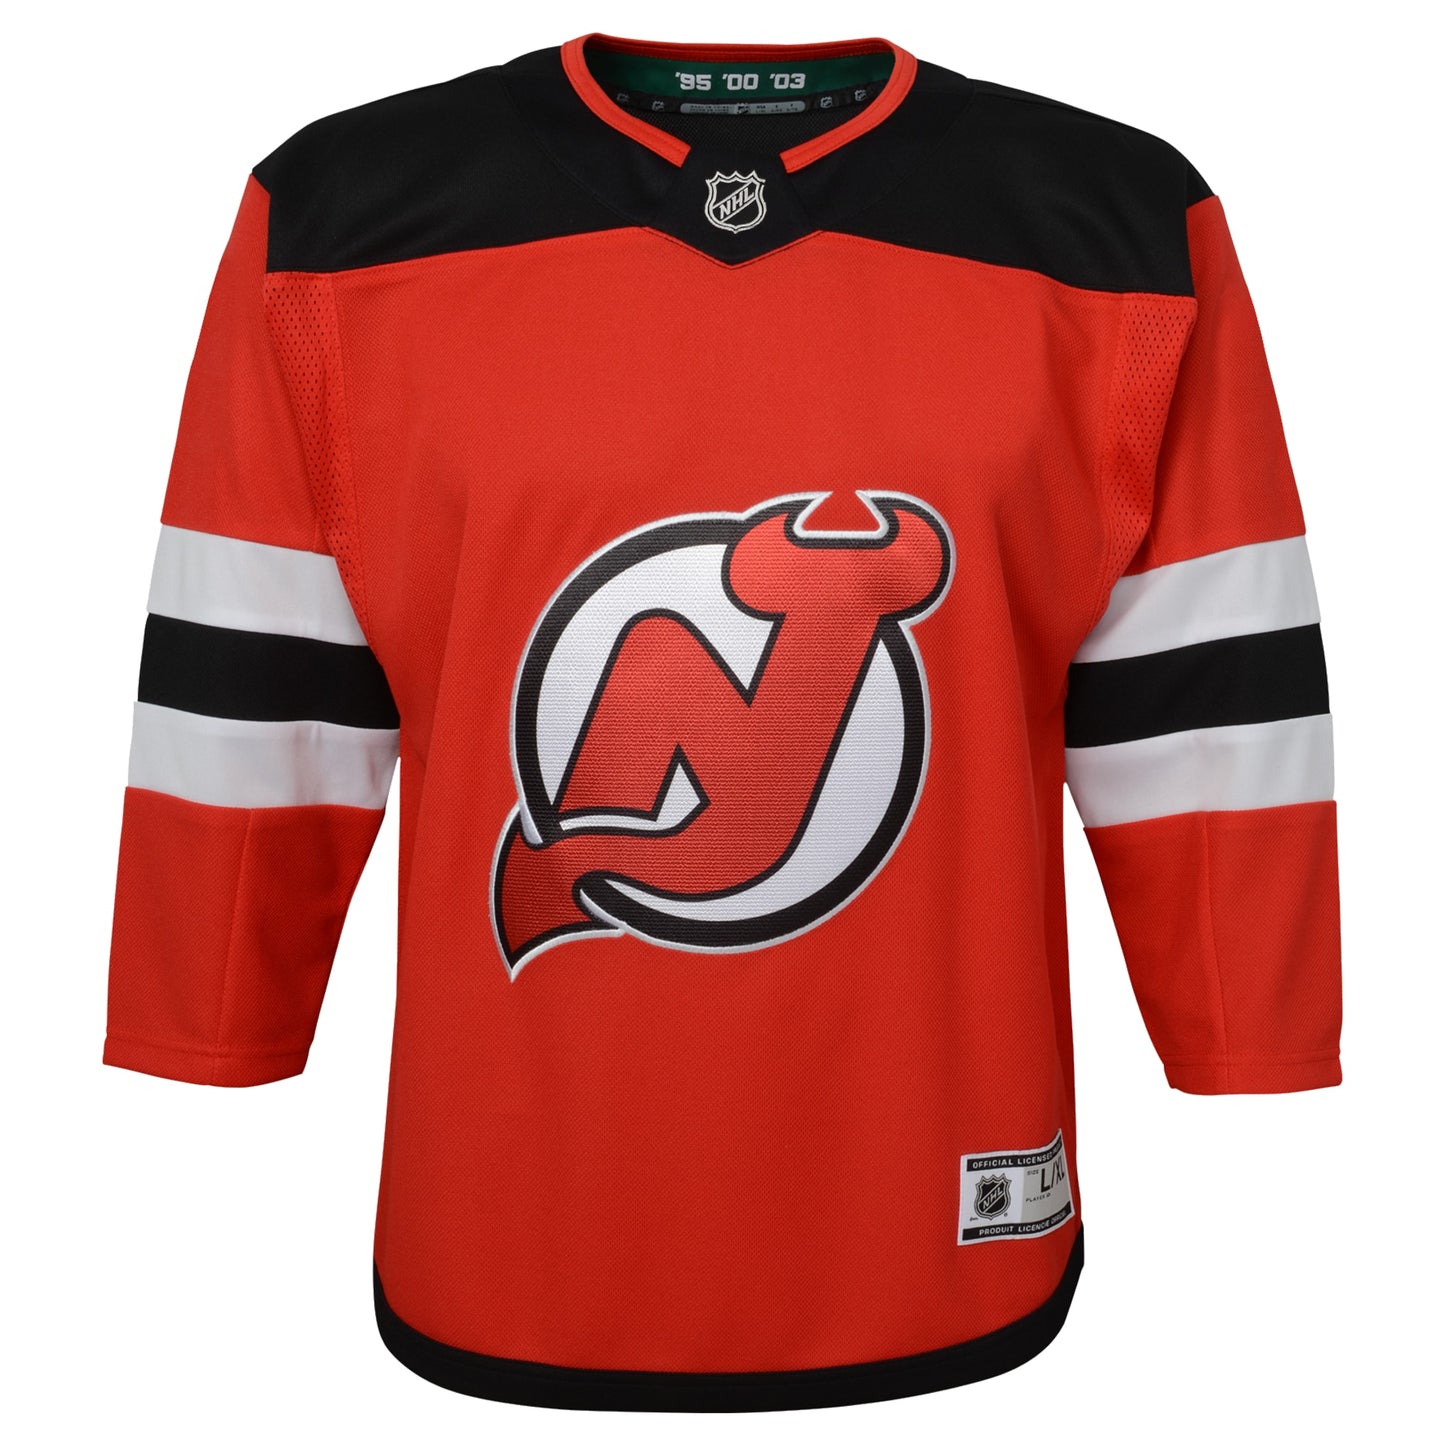 New Jersey Devils Youth Home Premier Blank Jersey - Red